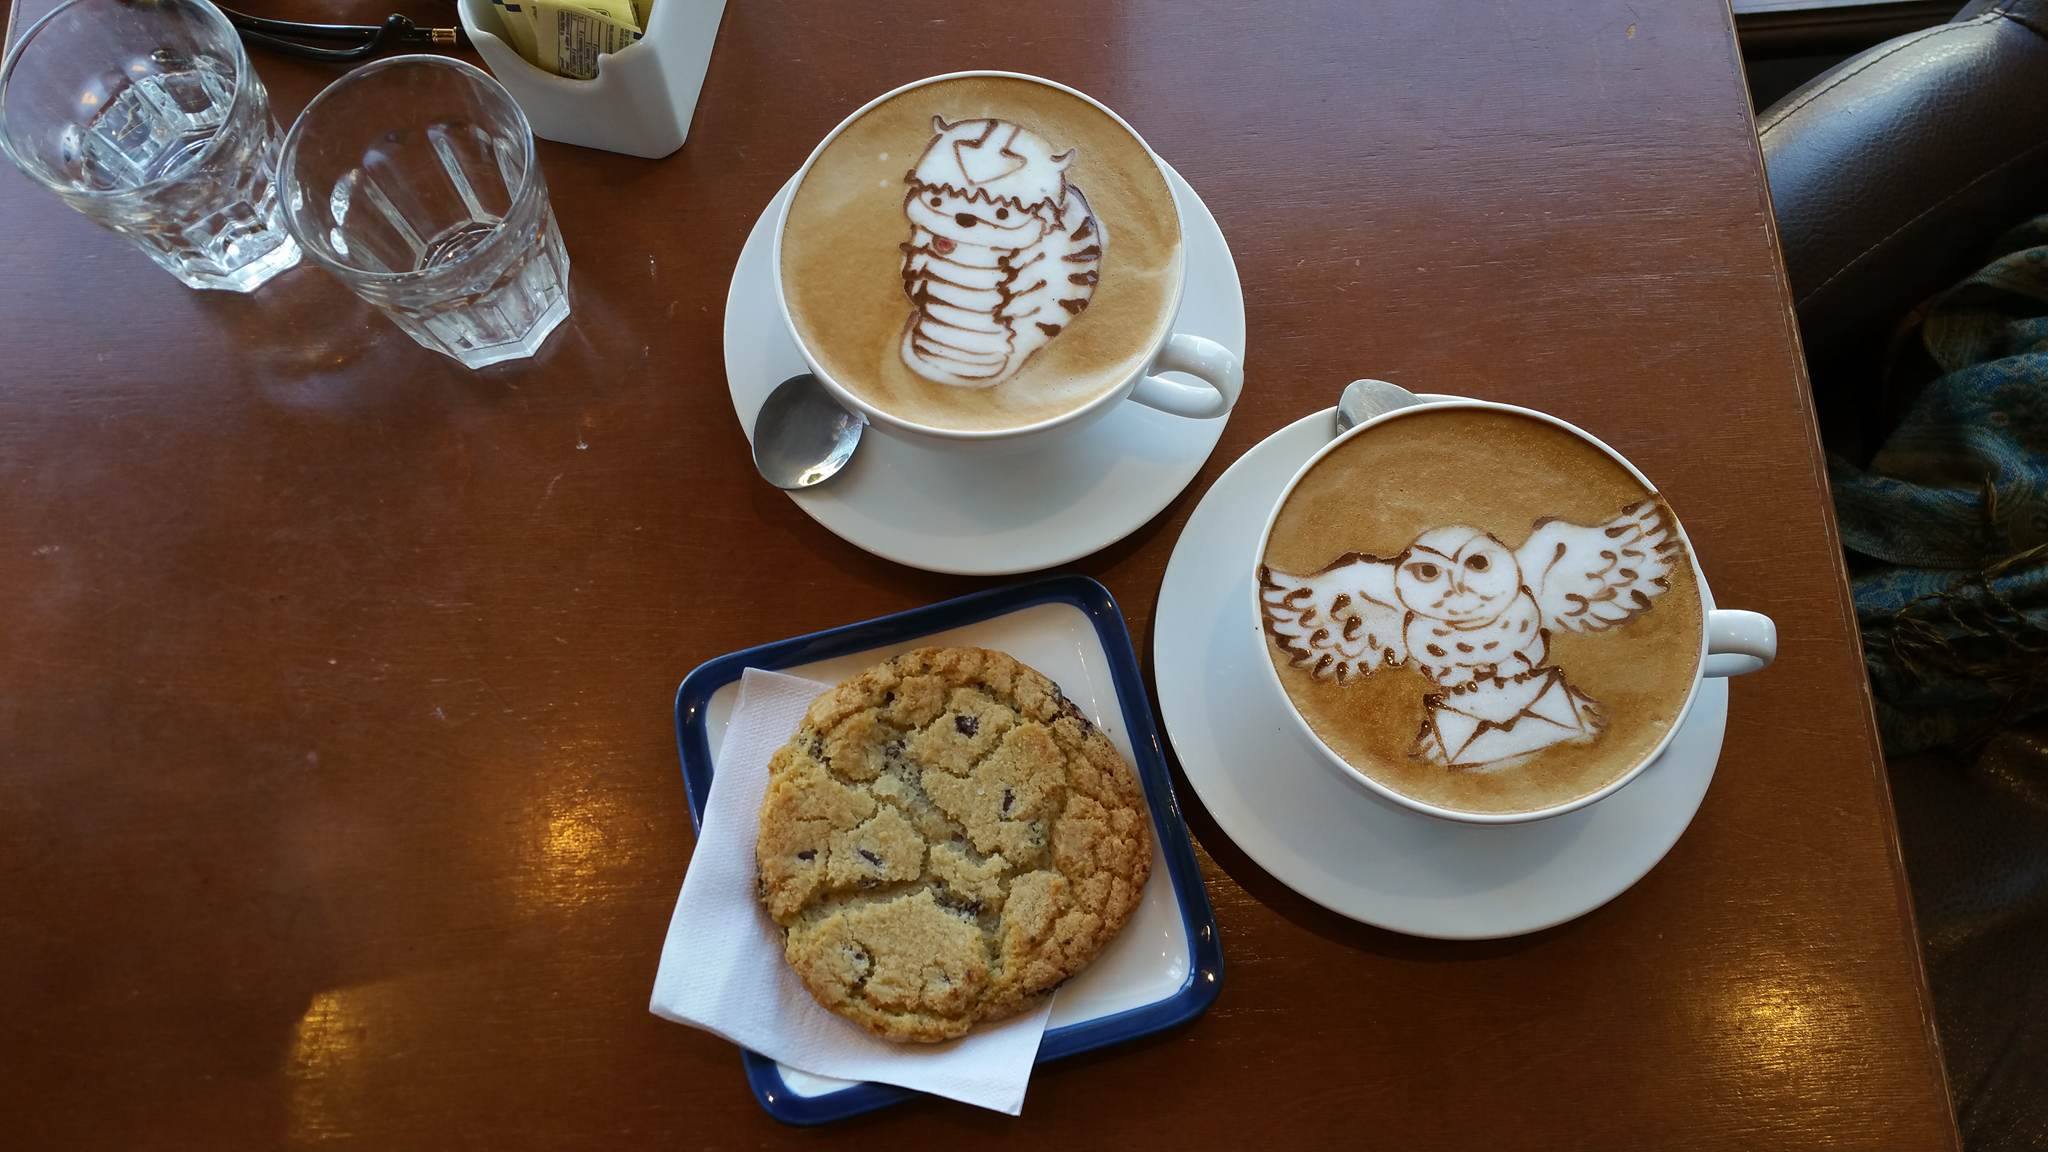 Two lattes and a cookie on table